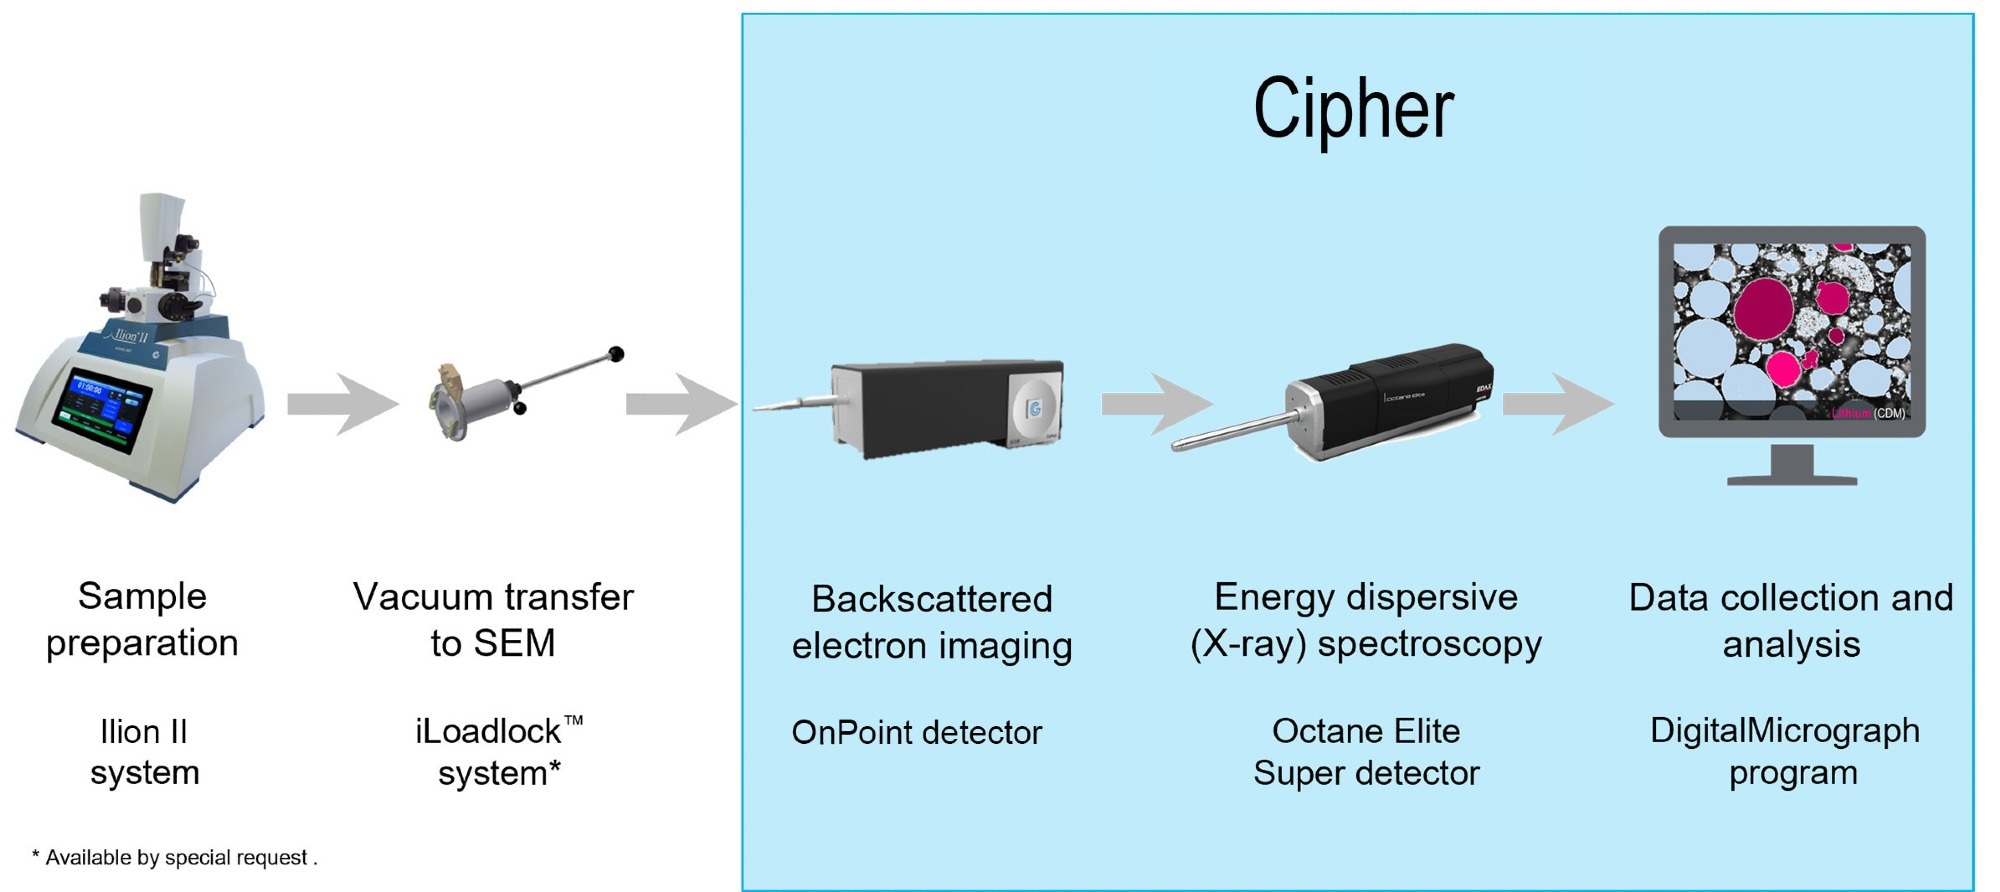 The Cipher system recharges your lithium research allowing you to perform quantitative analysis of the lithium content in a sample for the very first time.